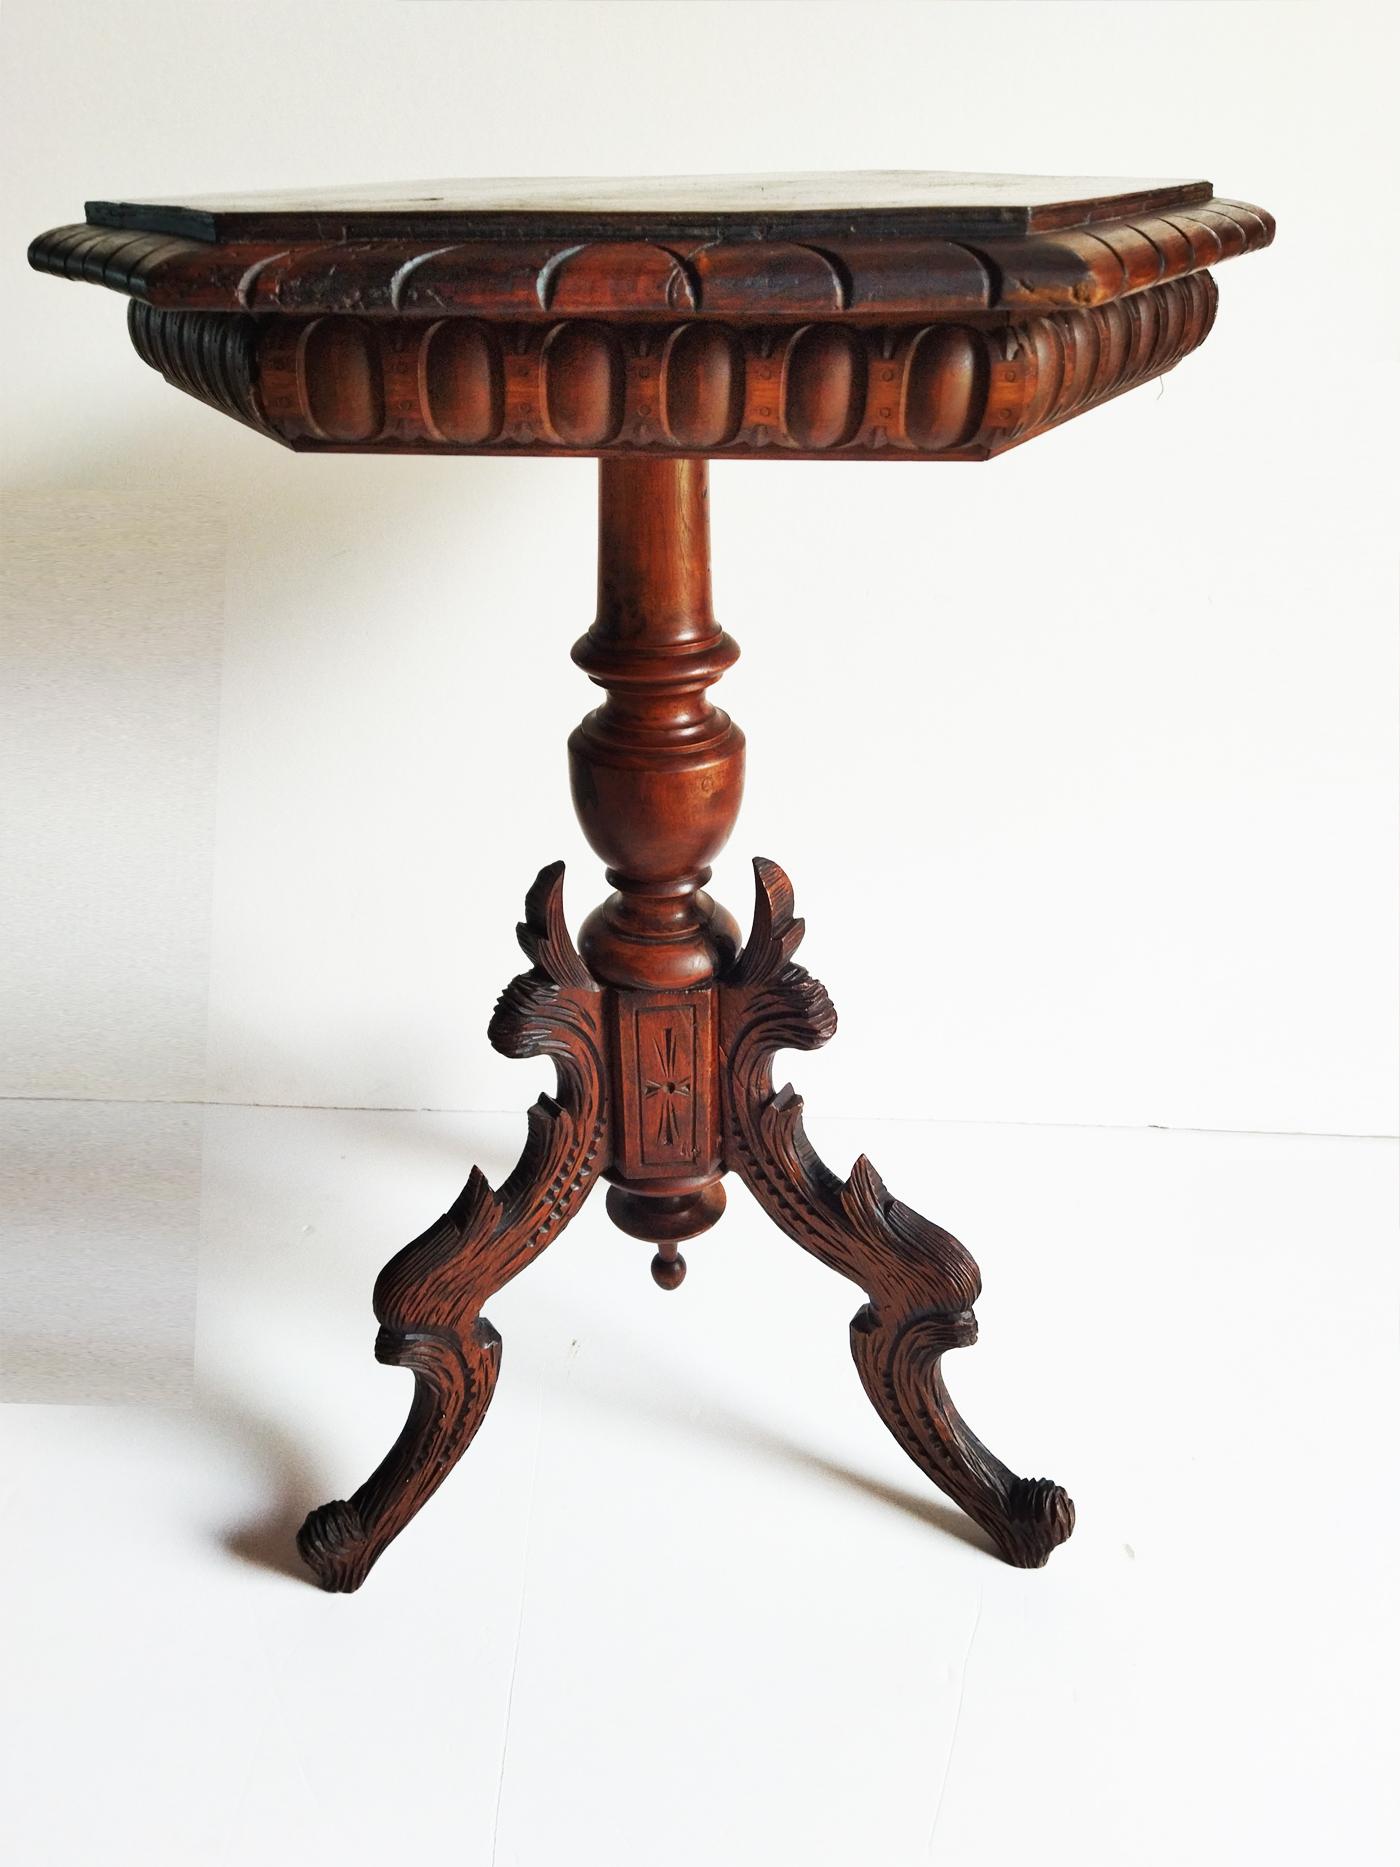 19th century pedestal base end table or Guerindon William IV Style

Tabletop in hexagonal shape, scalloped supported on three carved legs

Elizabethan Spanish style.

Made of noble wood. Rosewood or mahogany 

